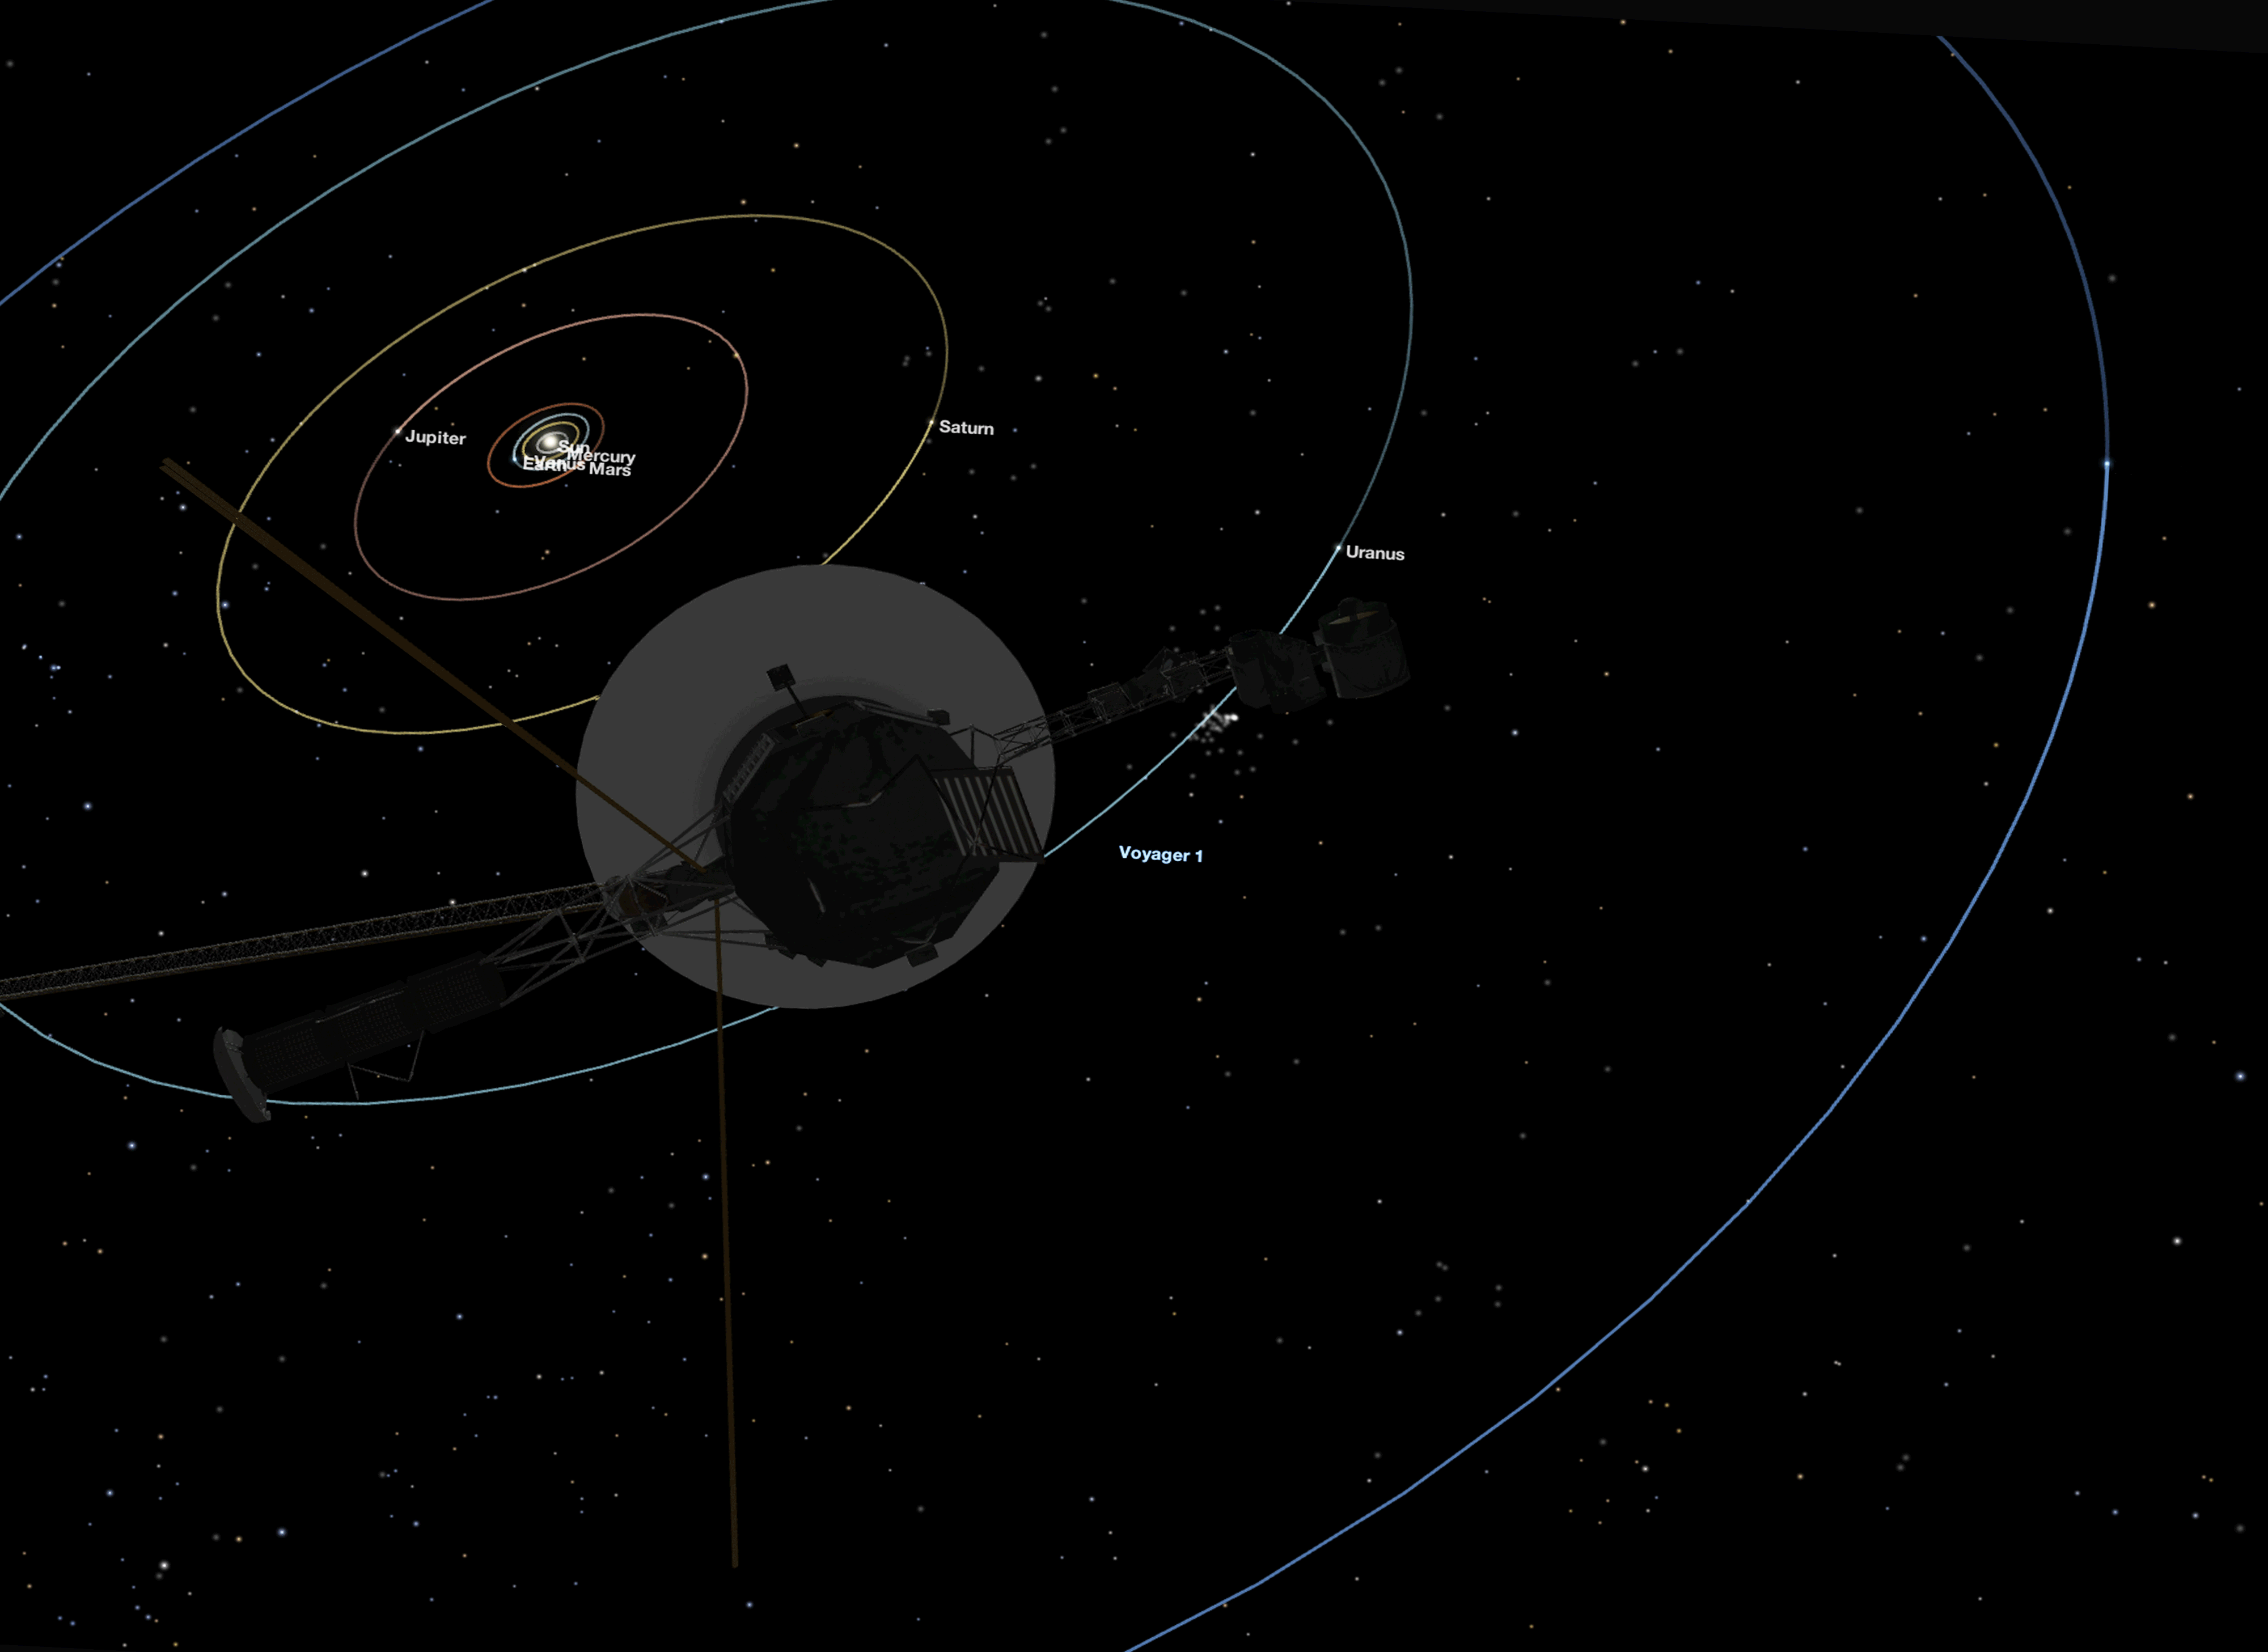 4163 animated gif showing the family portrait image from the perspective of voyager 1 in 1990 